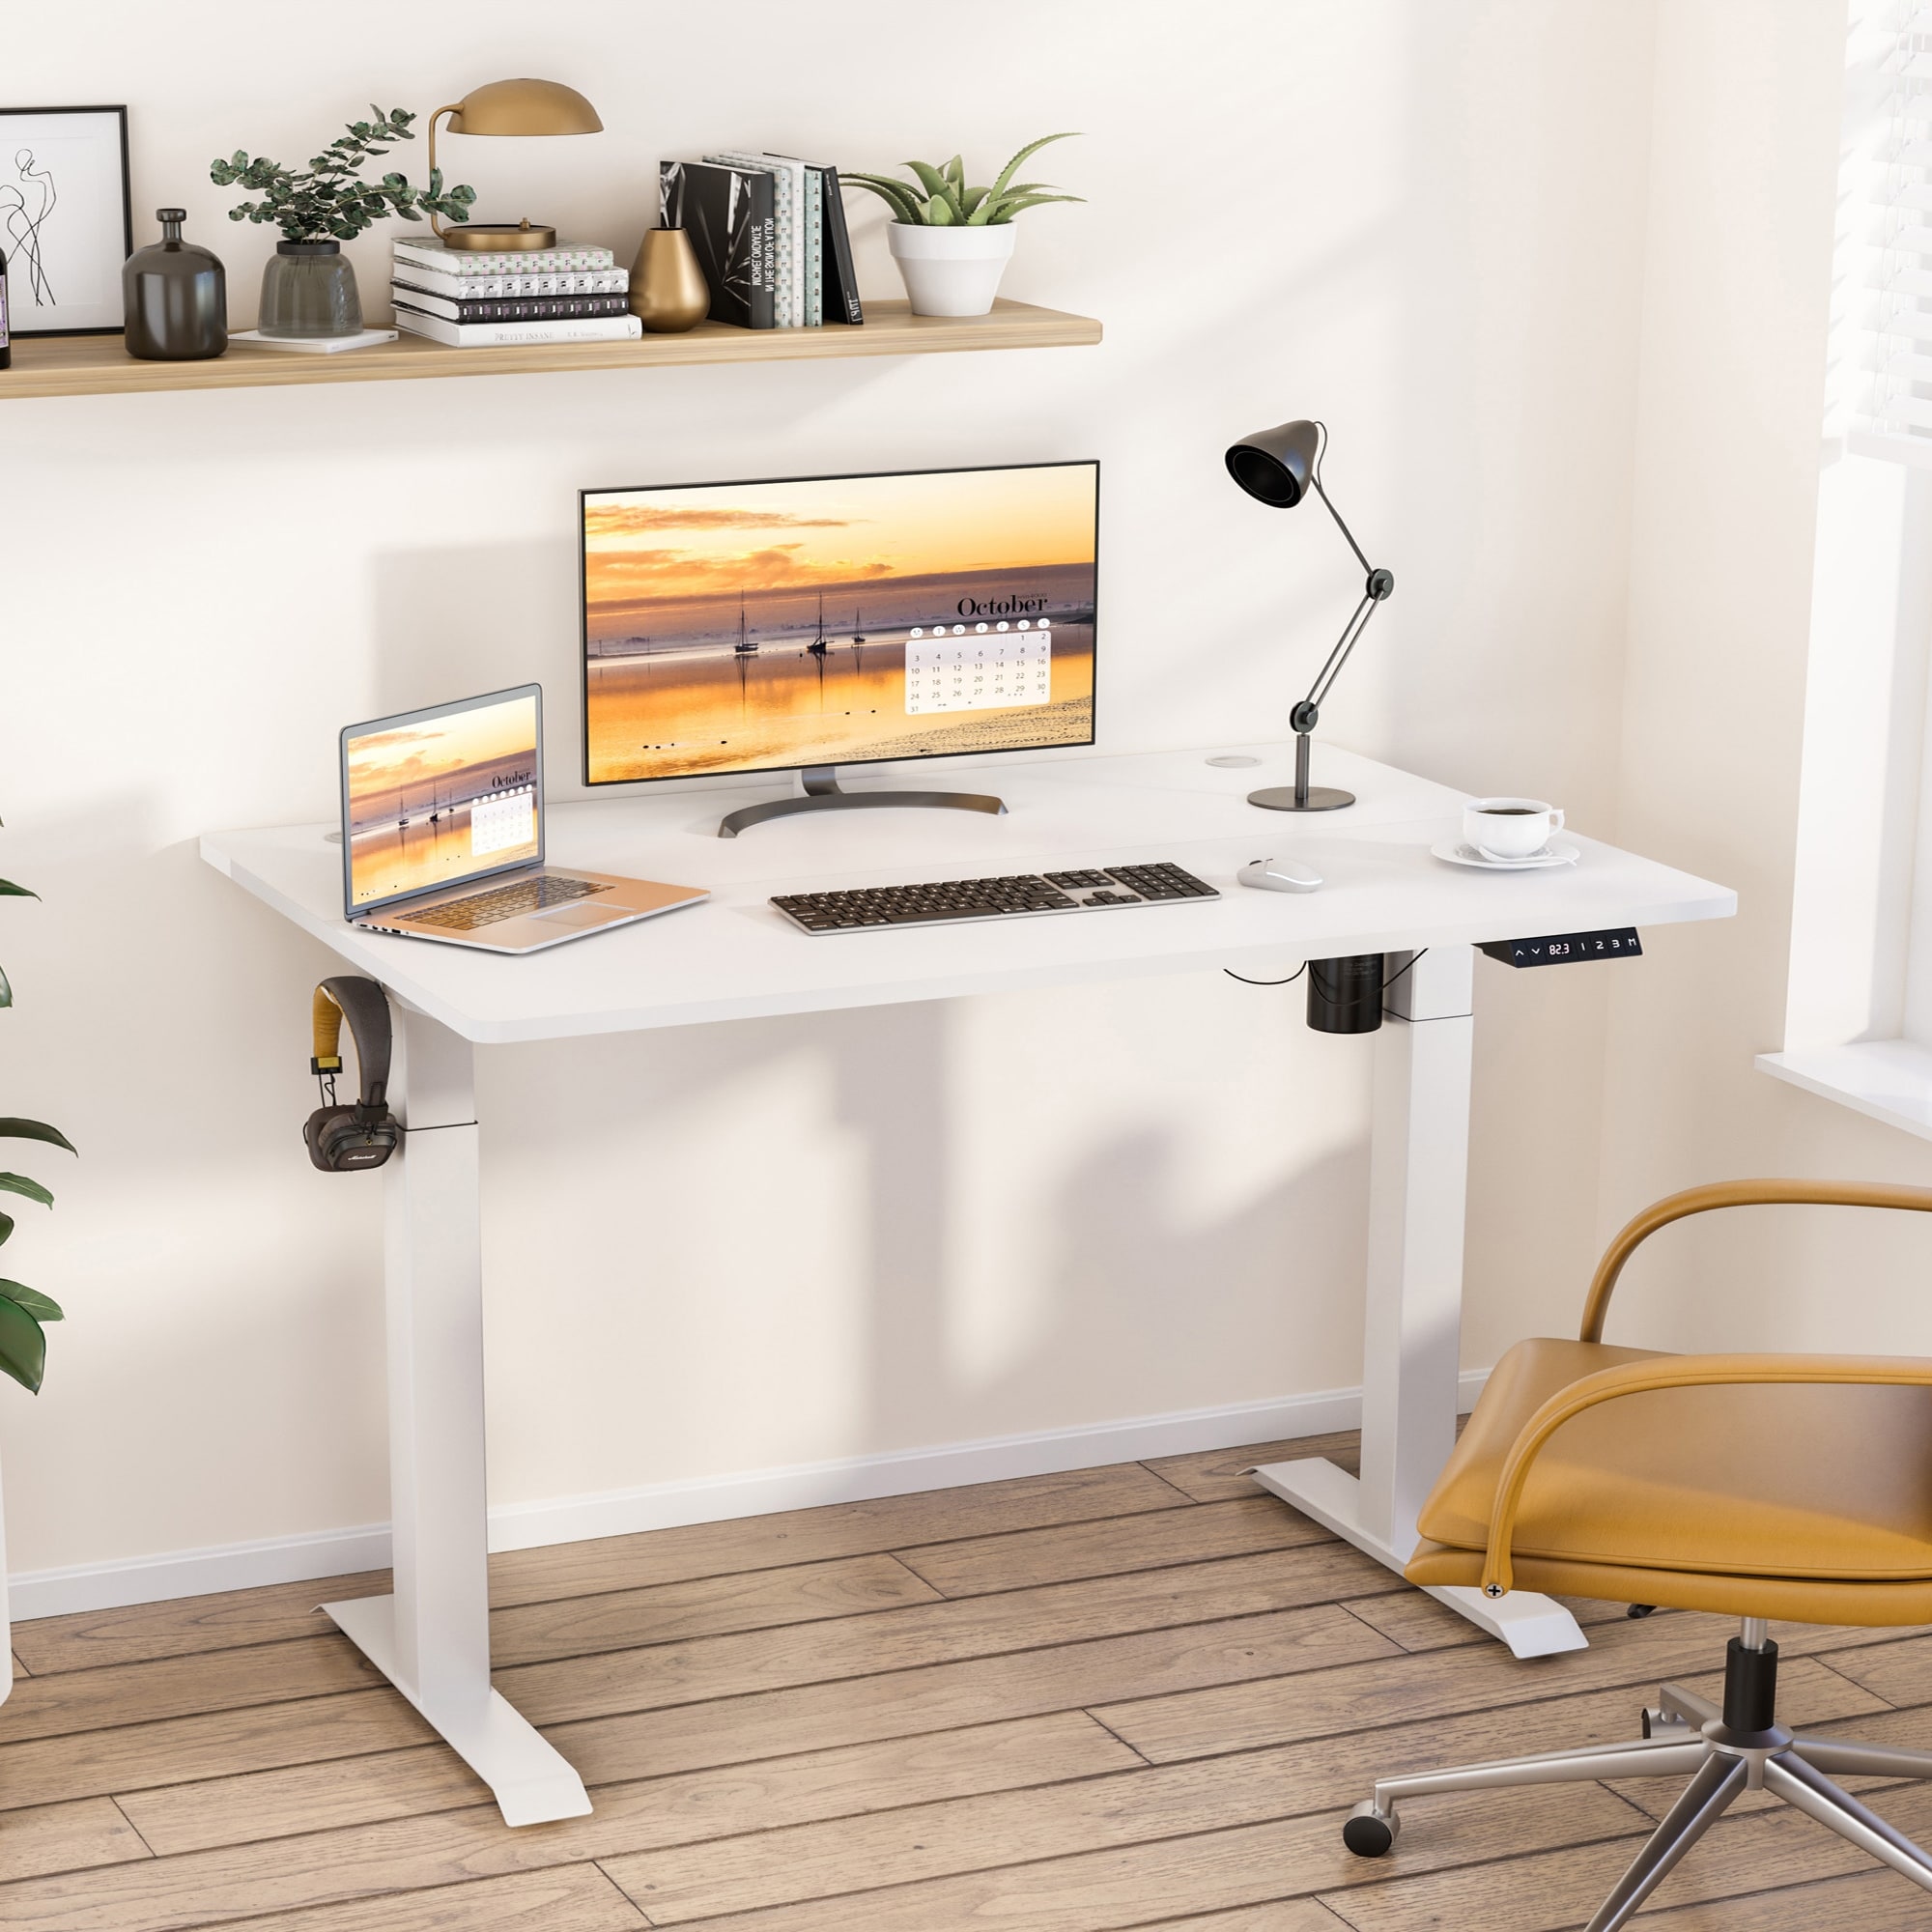 Flexispot EF1 review: What good is the height-adjustable desk?